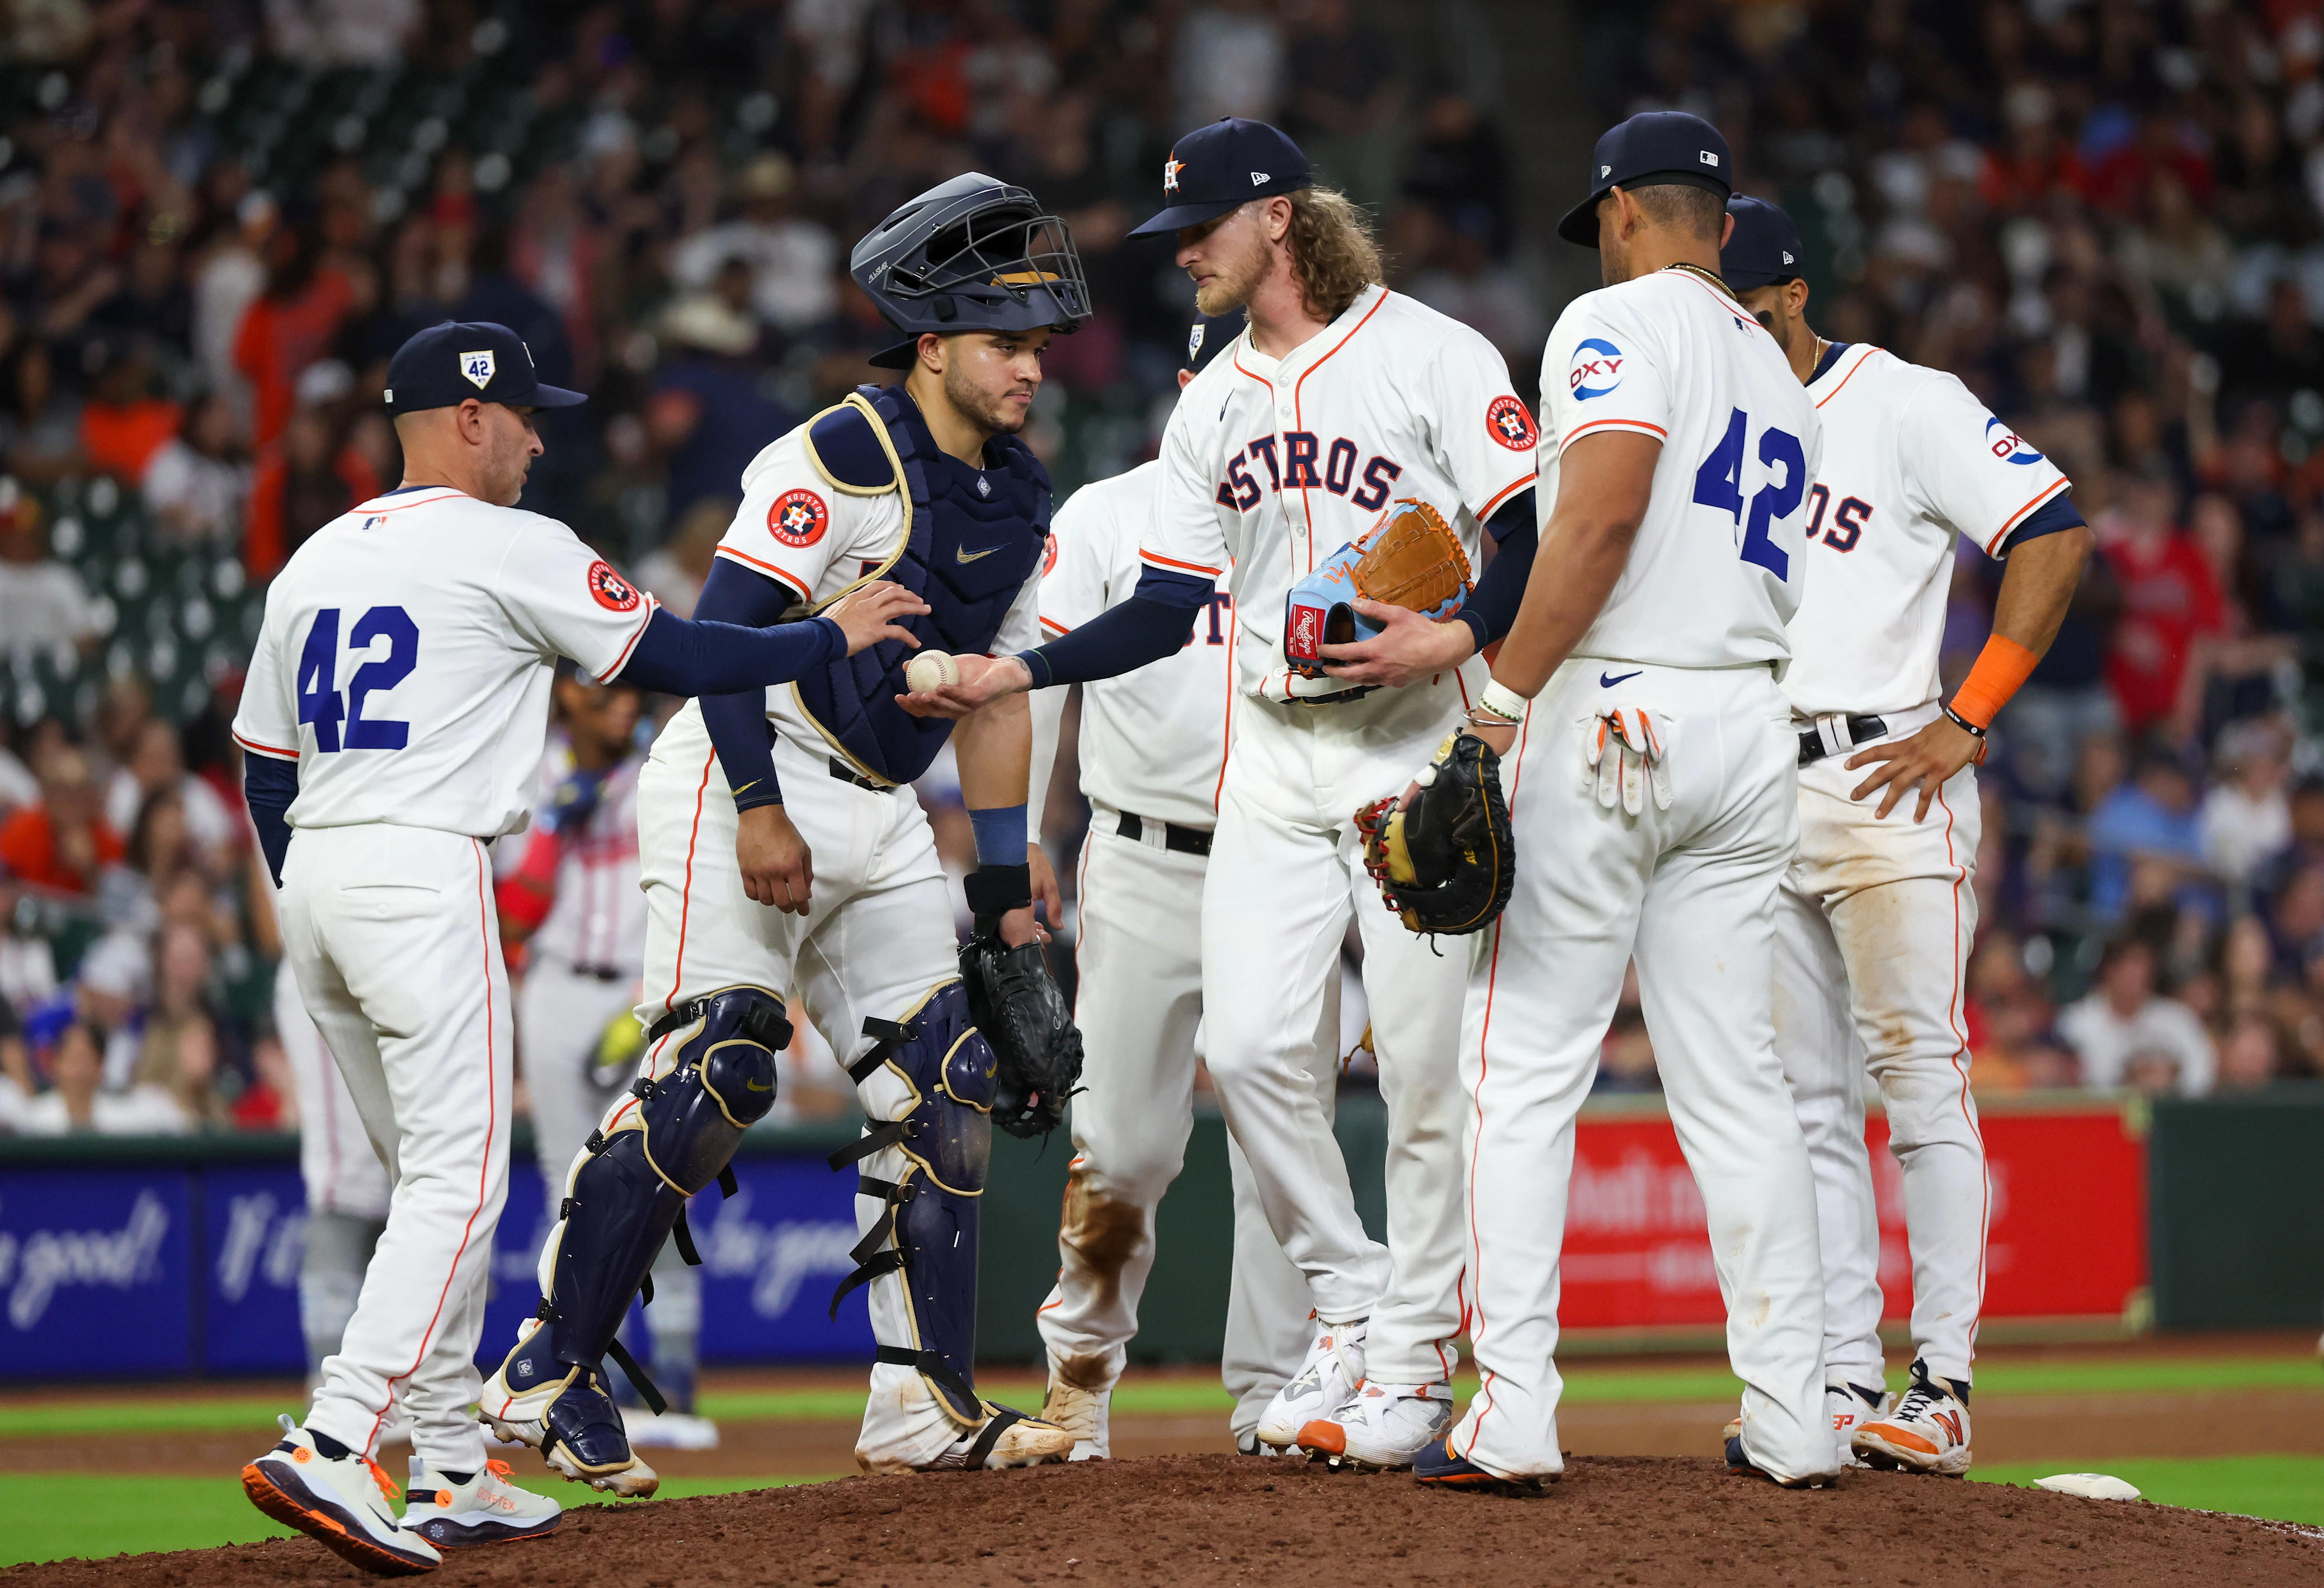 how to, with ugly start, the houston astros' al dynasty is in danger. but they know 'how to fight back'